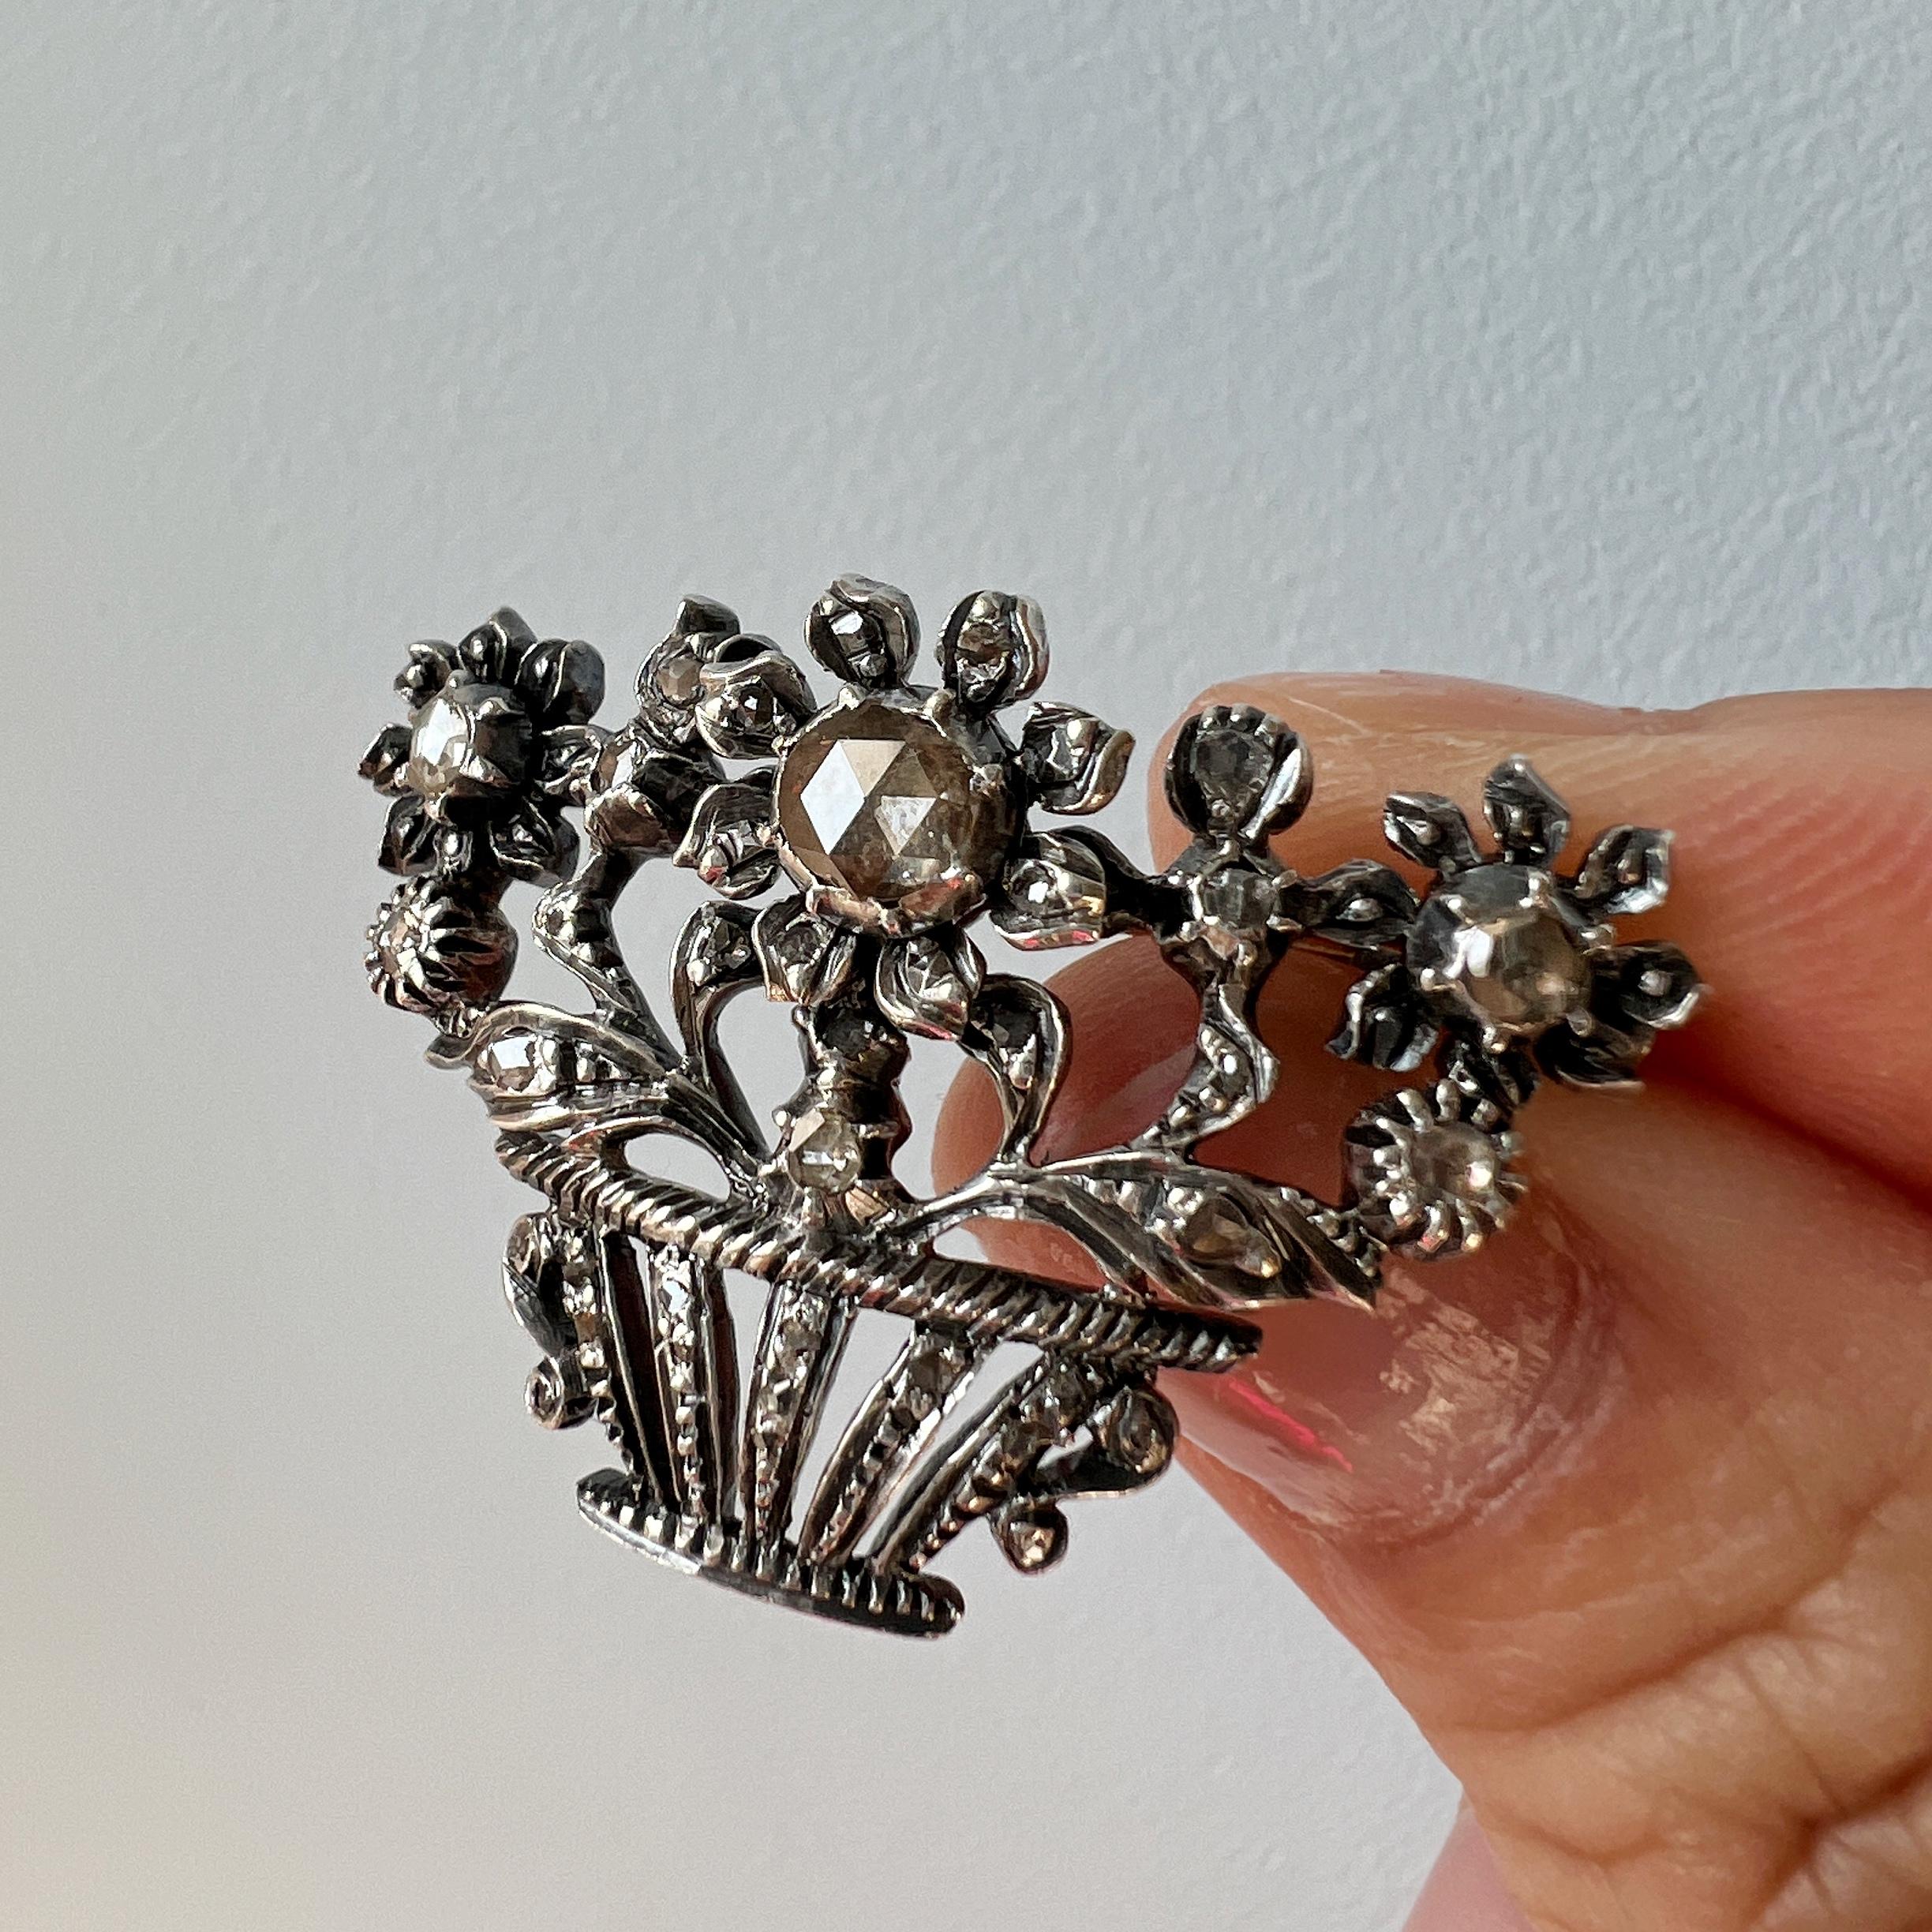 For sale a beautiful flower basket diamond brooch, with a definite nod to the romanticism of a bygone era.

The brooch combines rose cut diamonds with an enchanting floral design. The biggest rose cut diamond on the flower measures 6mm in diameter